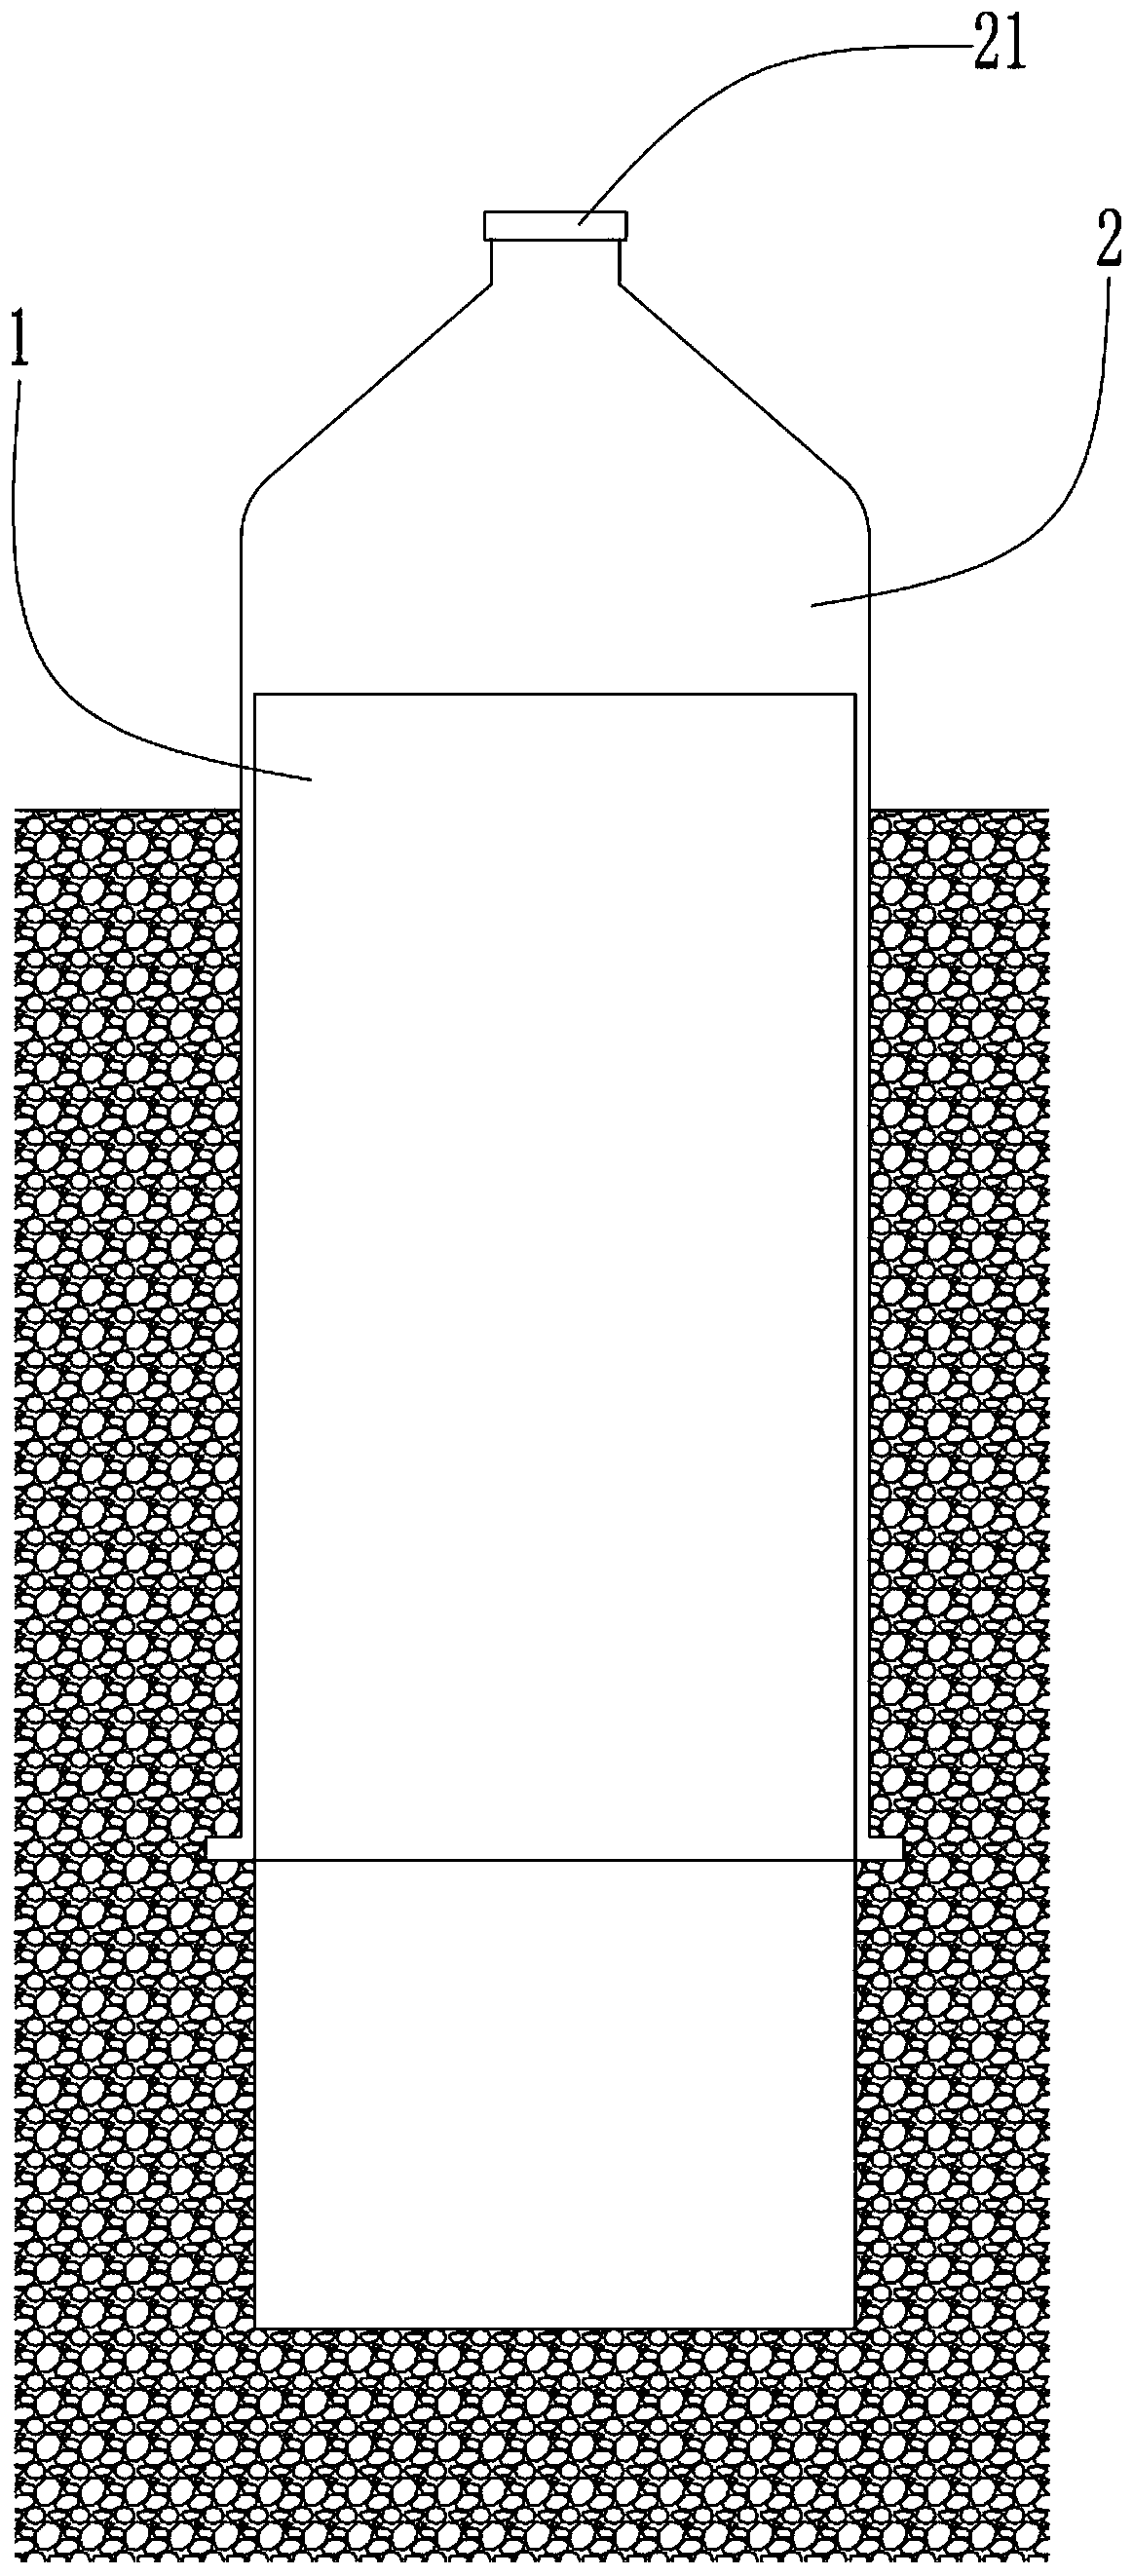 Construction method of cast-in-place pile